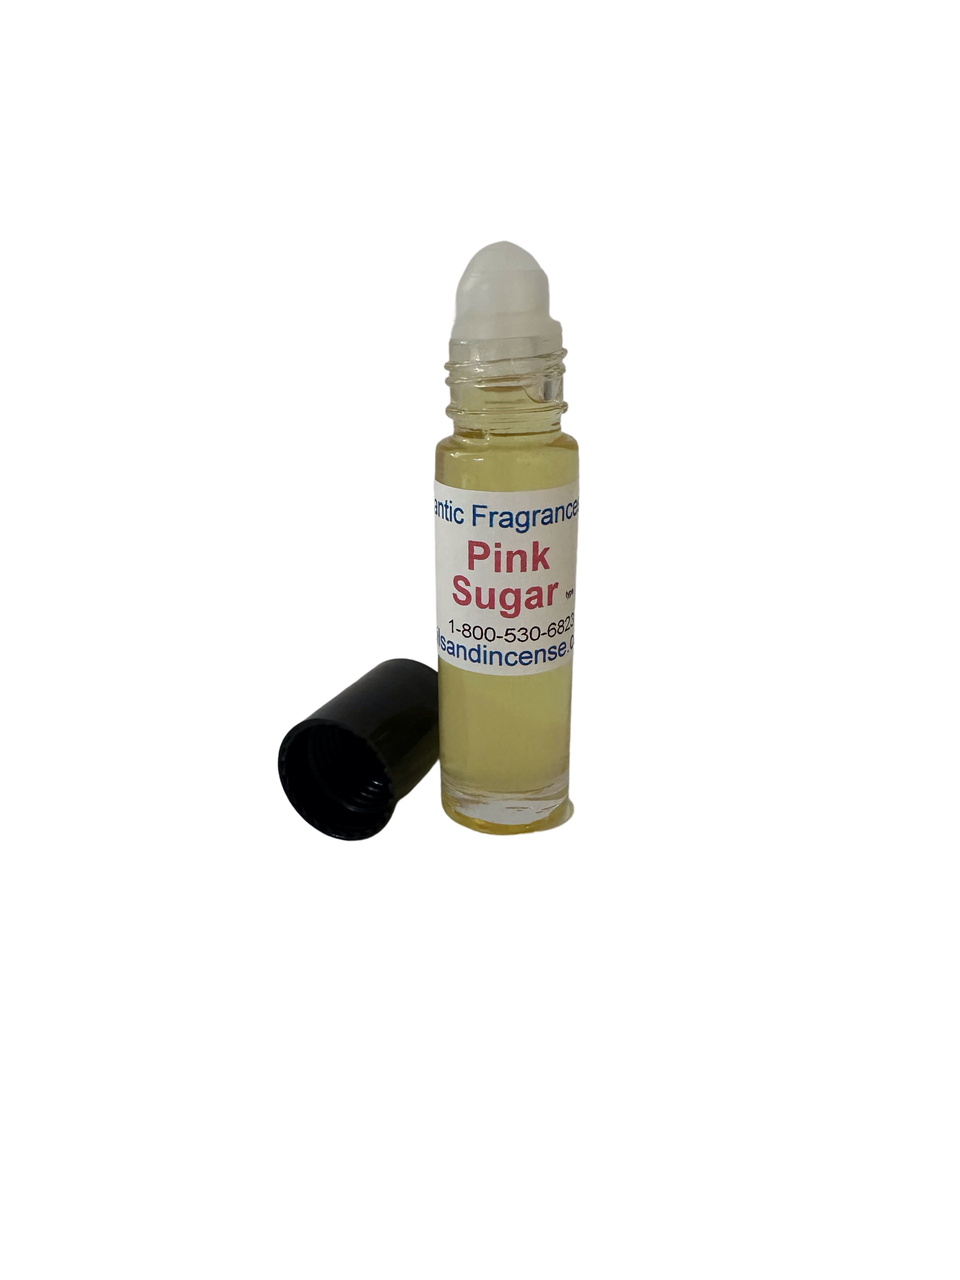 Pink Sugar roll on perfume oil from Atlantic Fragrances /Oils and Incense